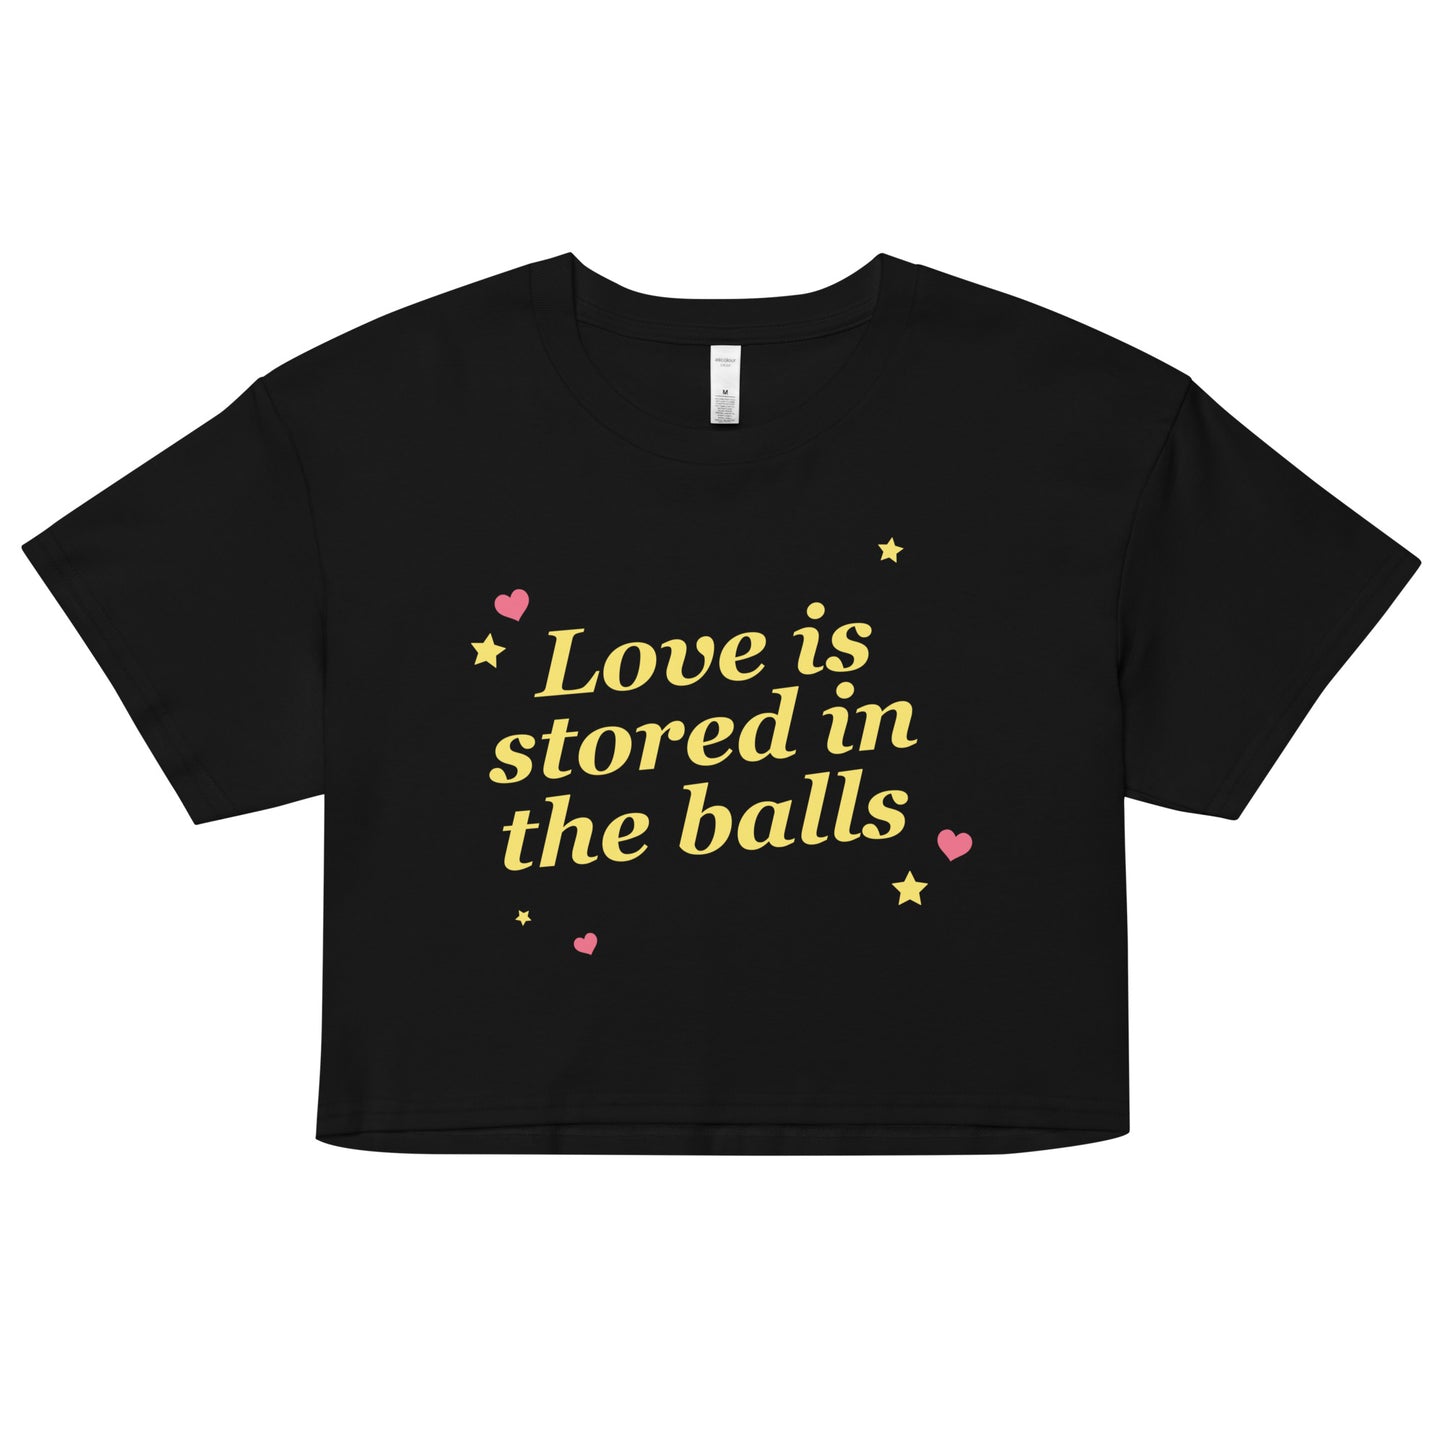 Love is Stored in the Balls crop top